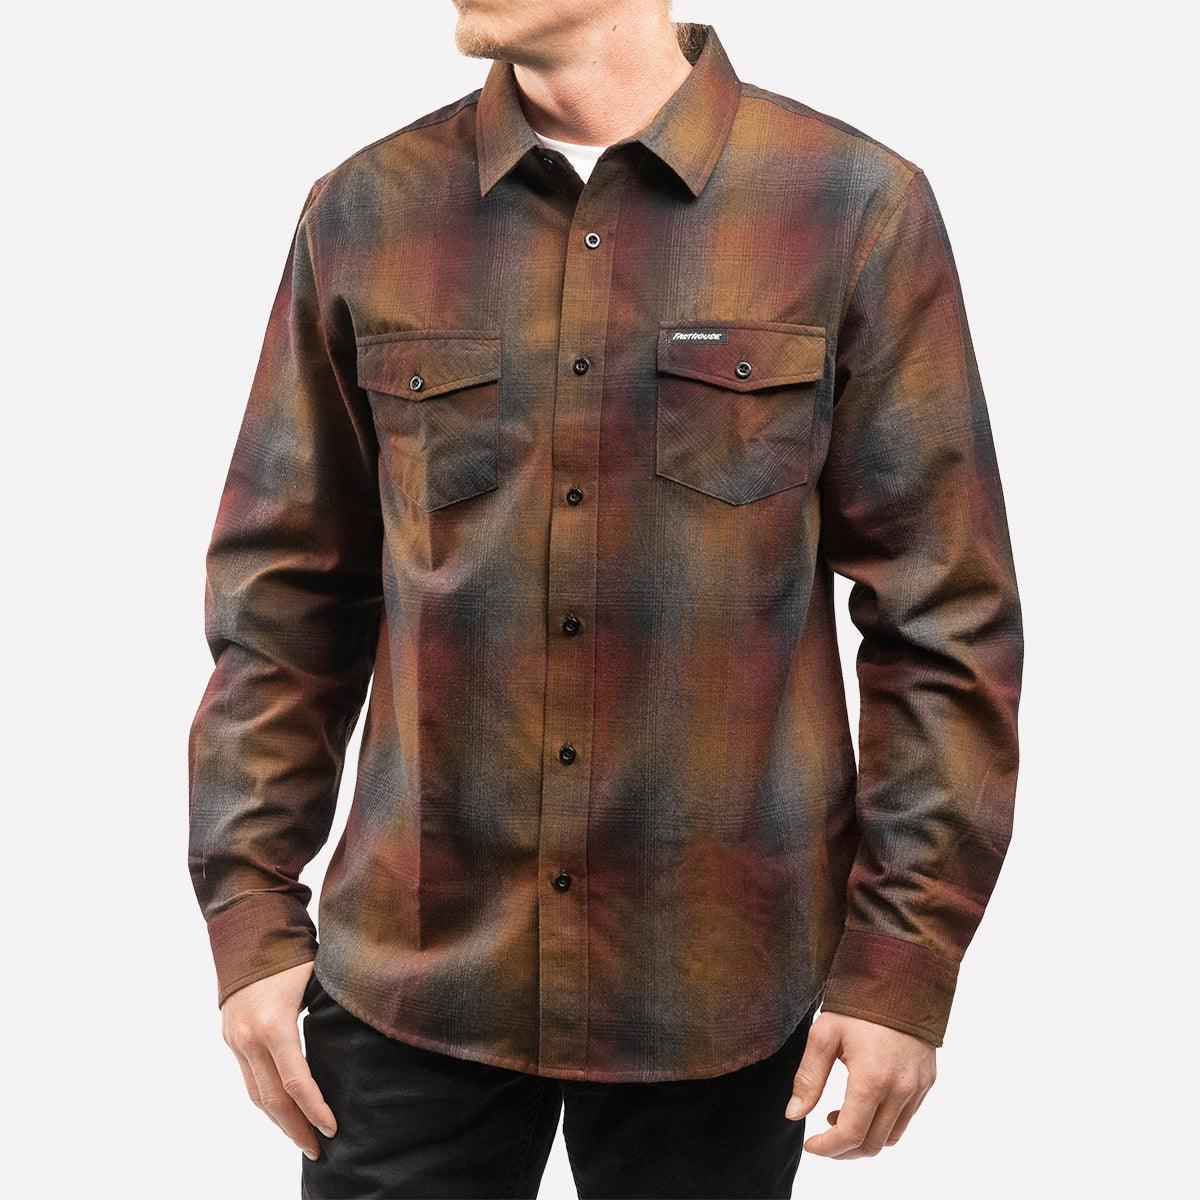 Saturday Night Special Flannel - Dusk - Purpose-Built / Home of the Trades